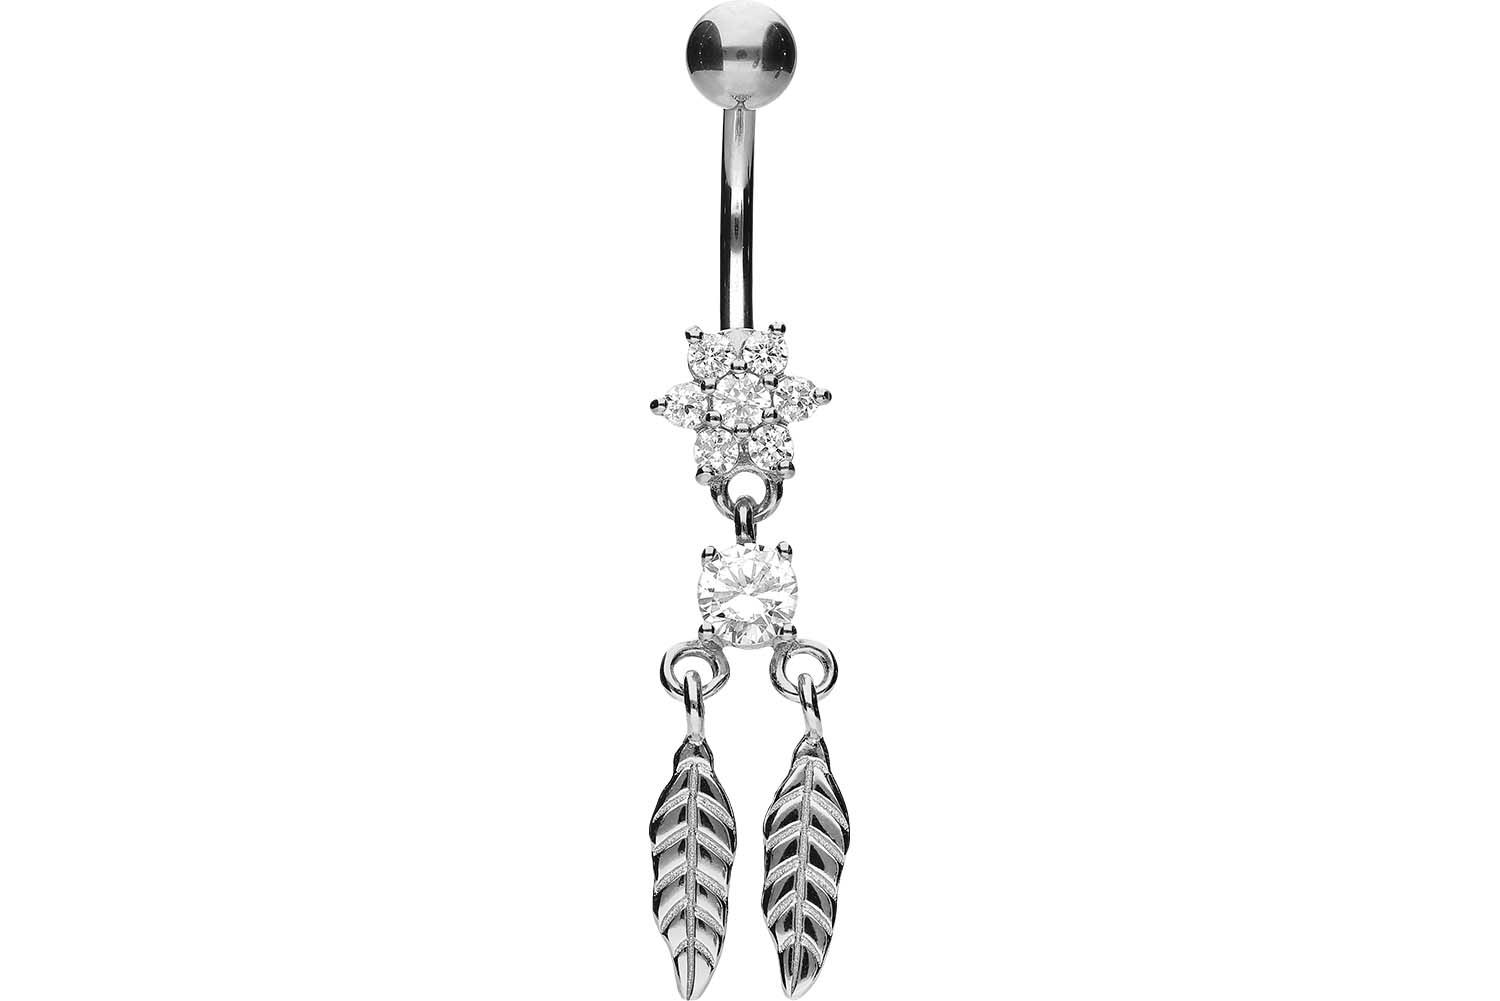 Titanium bananabell with 925 silver design CRYSTAL FLOWER + TWO FEATHERS ++SALE+